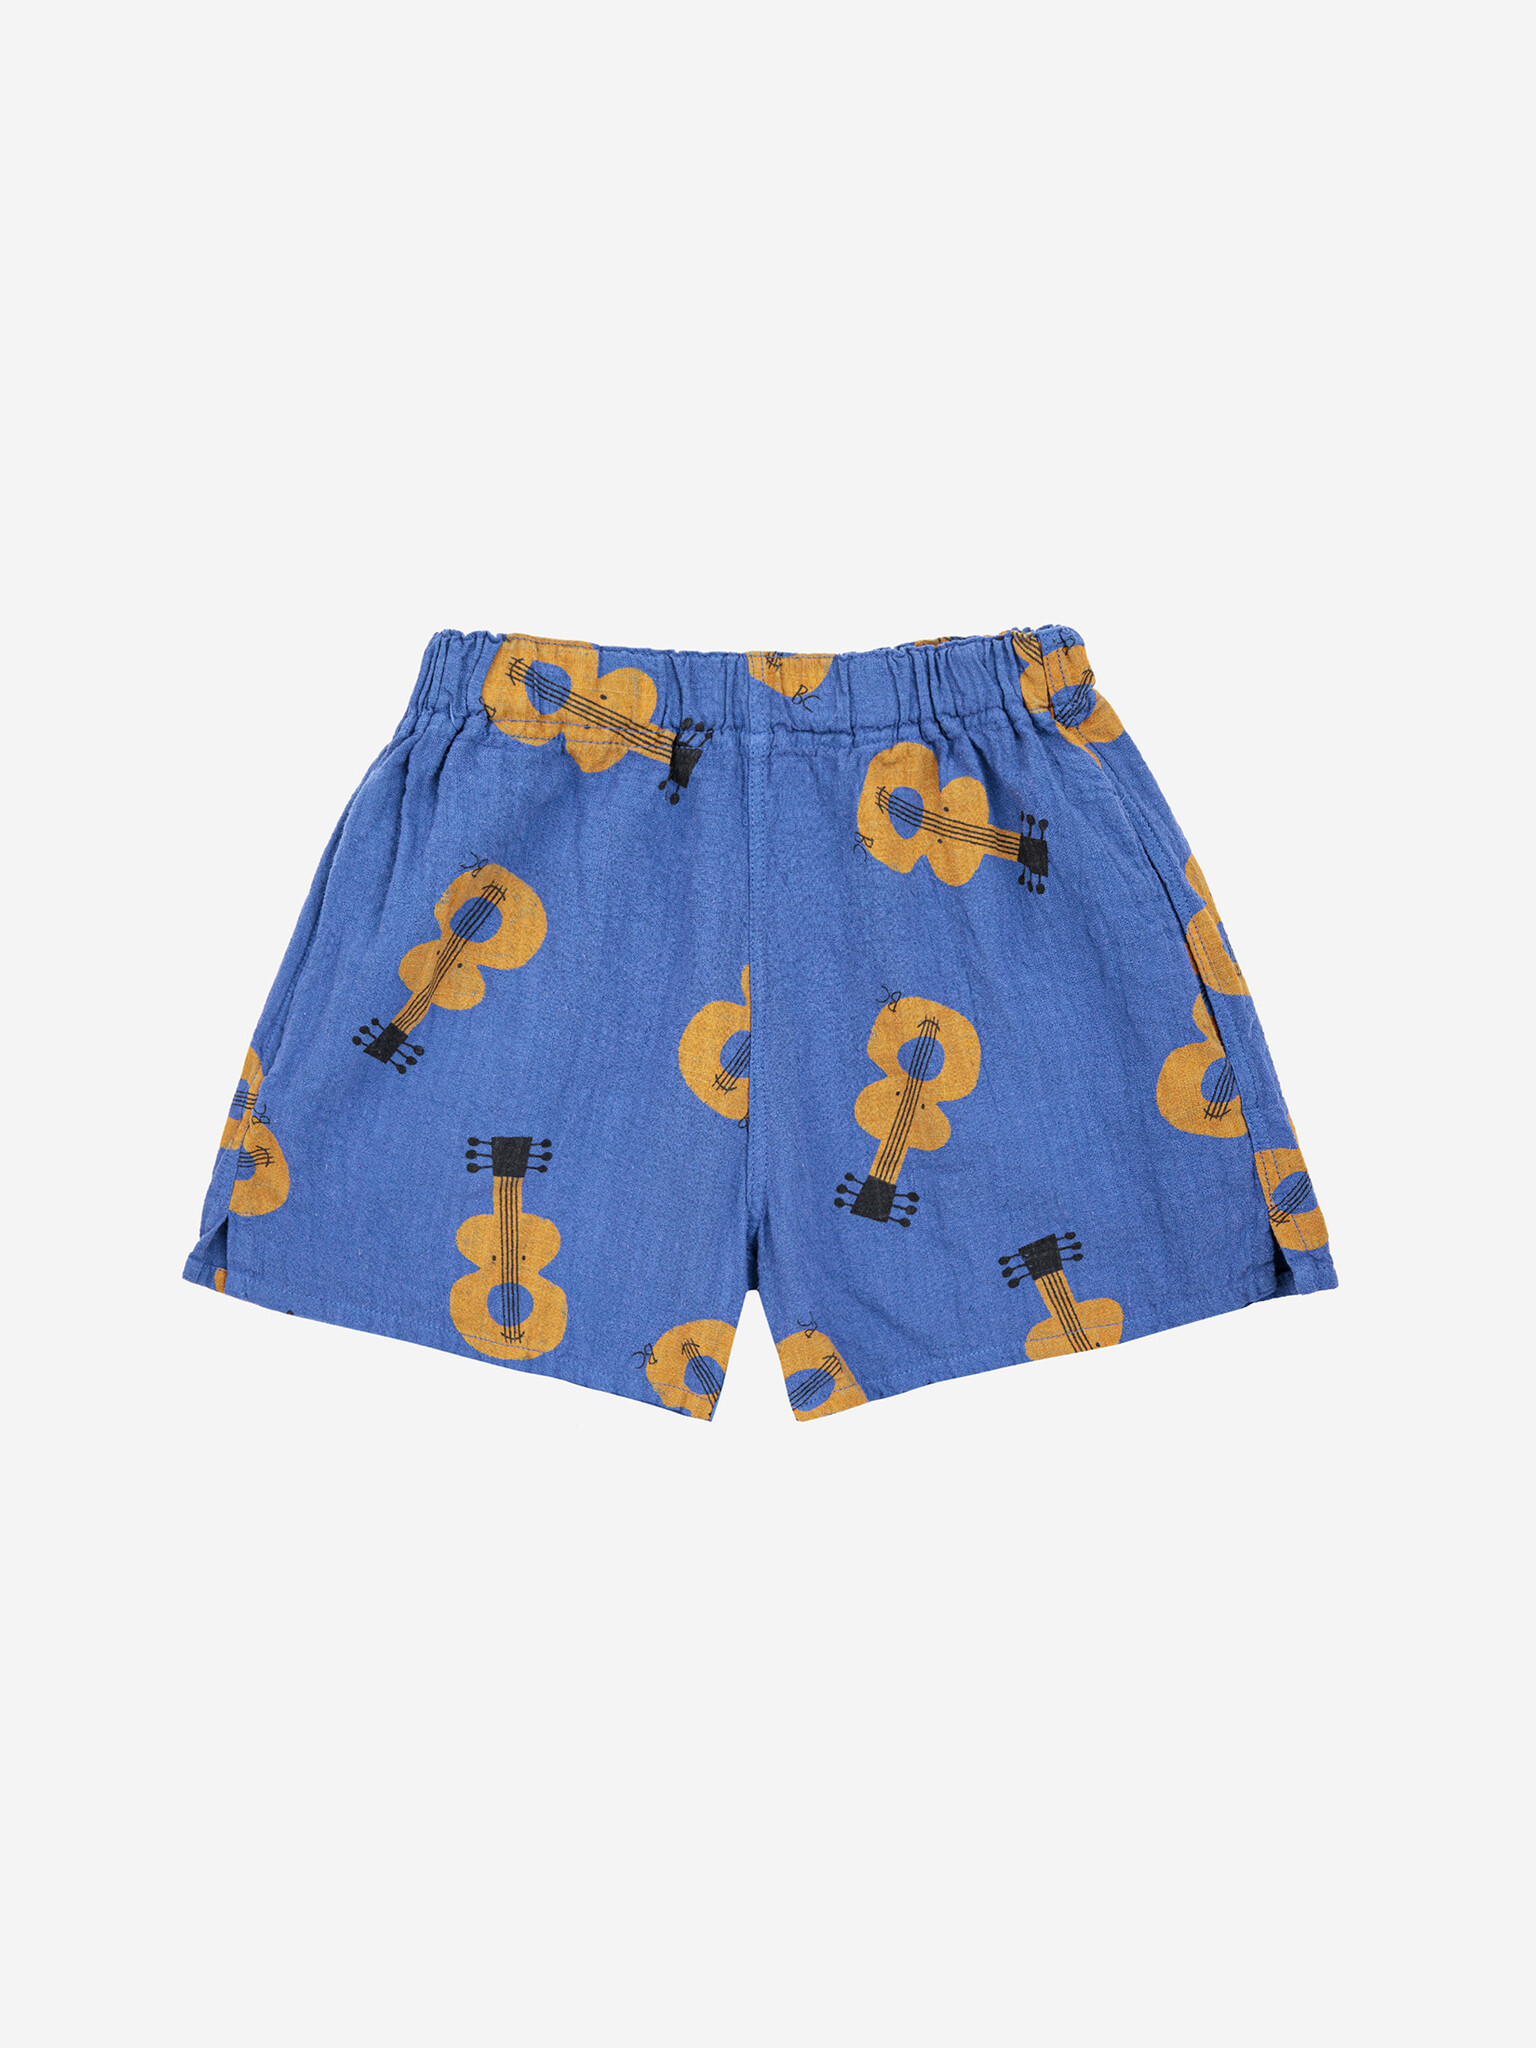 Bobo Choses Acoustic Guitar All Over | Woven Shorts